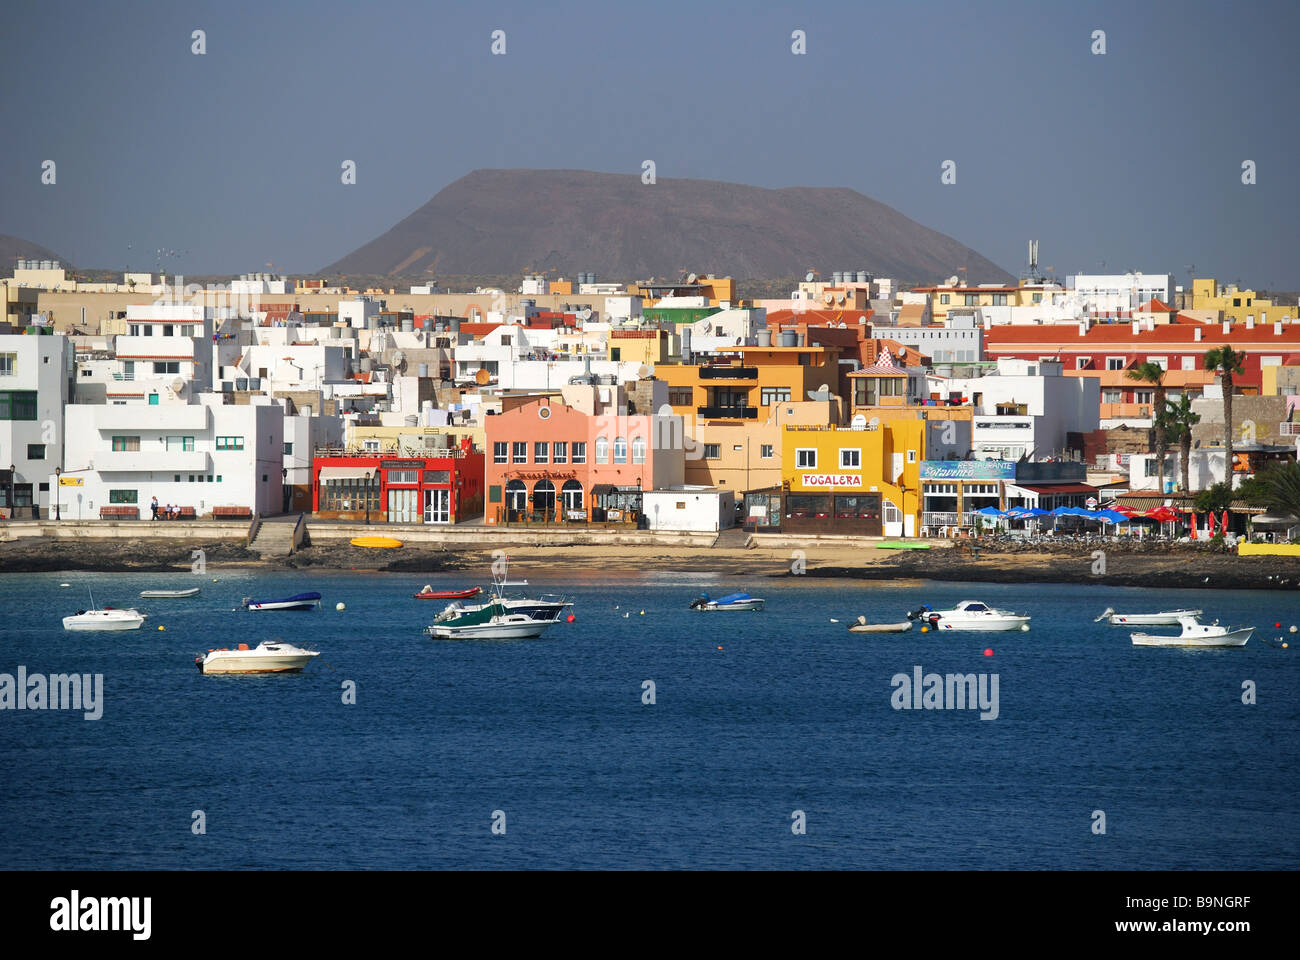 View of town and harbour, Corralejo, Fuerteventura, Canary Islands, Spain Stock Photo